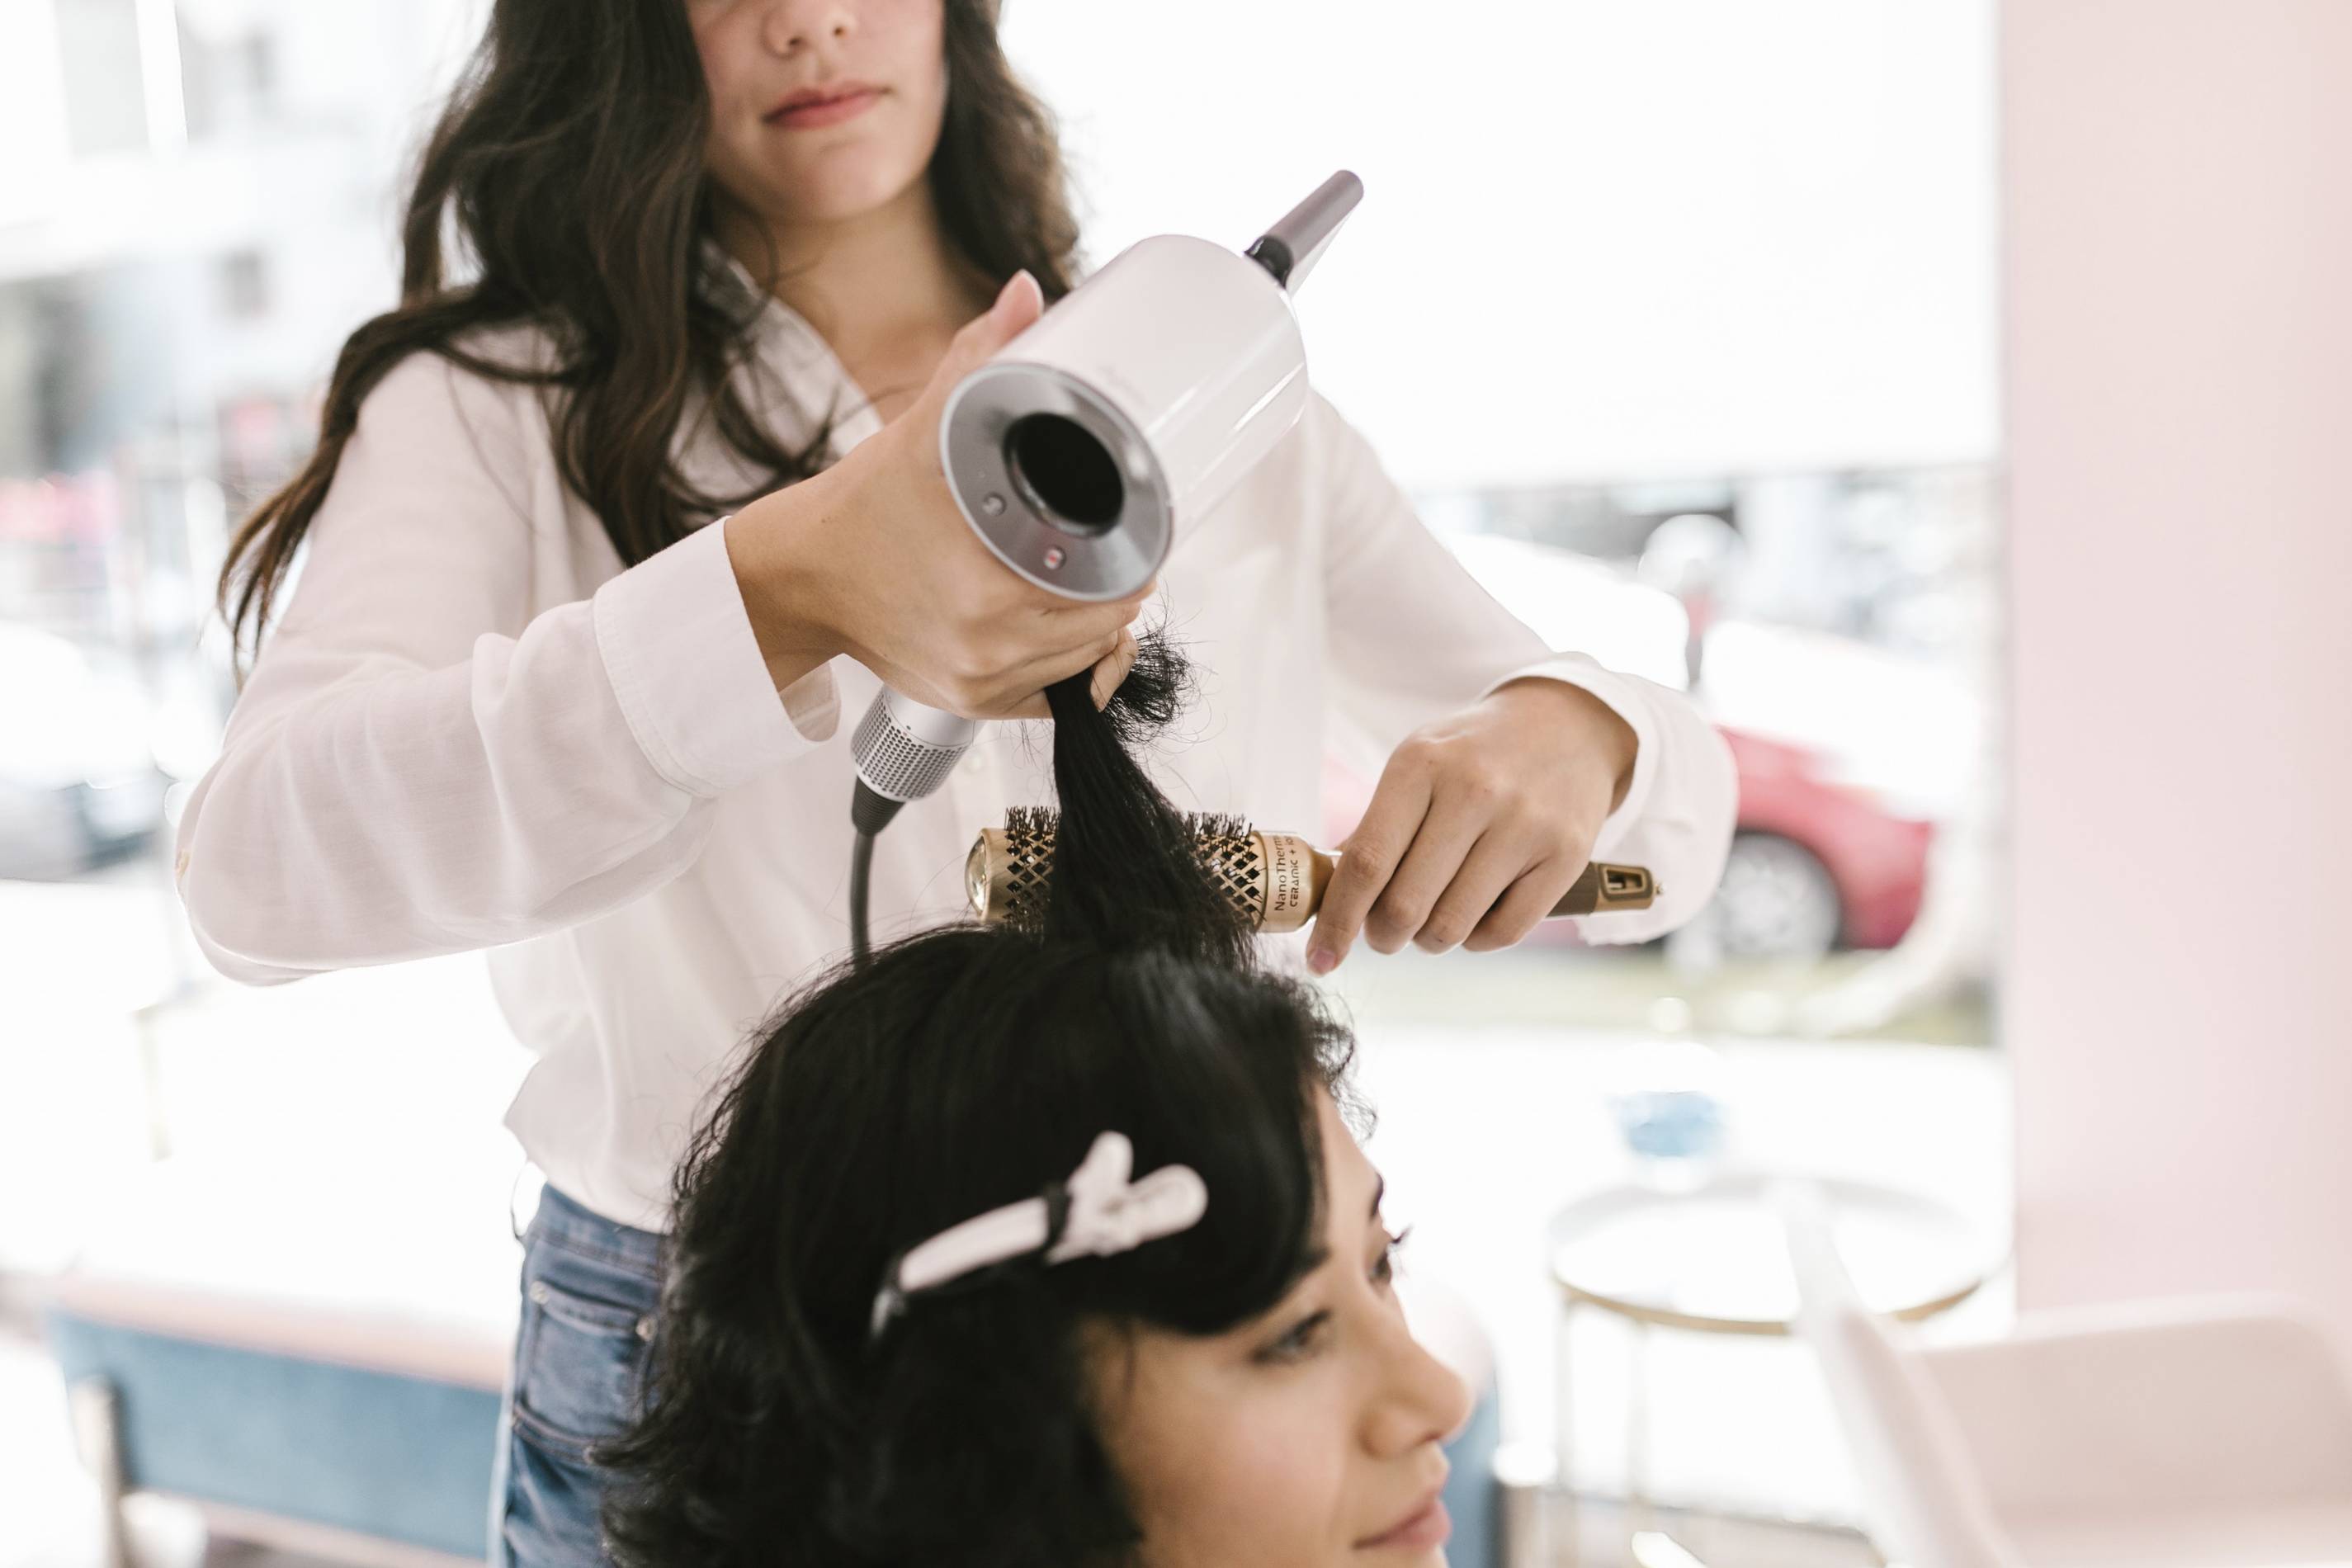 7 Best Hair Salons In NYC: New York's Top Hairstylists in 2022